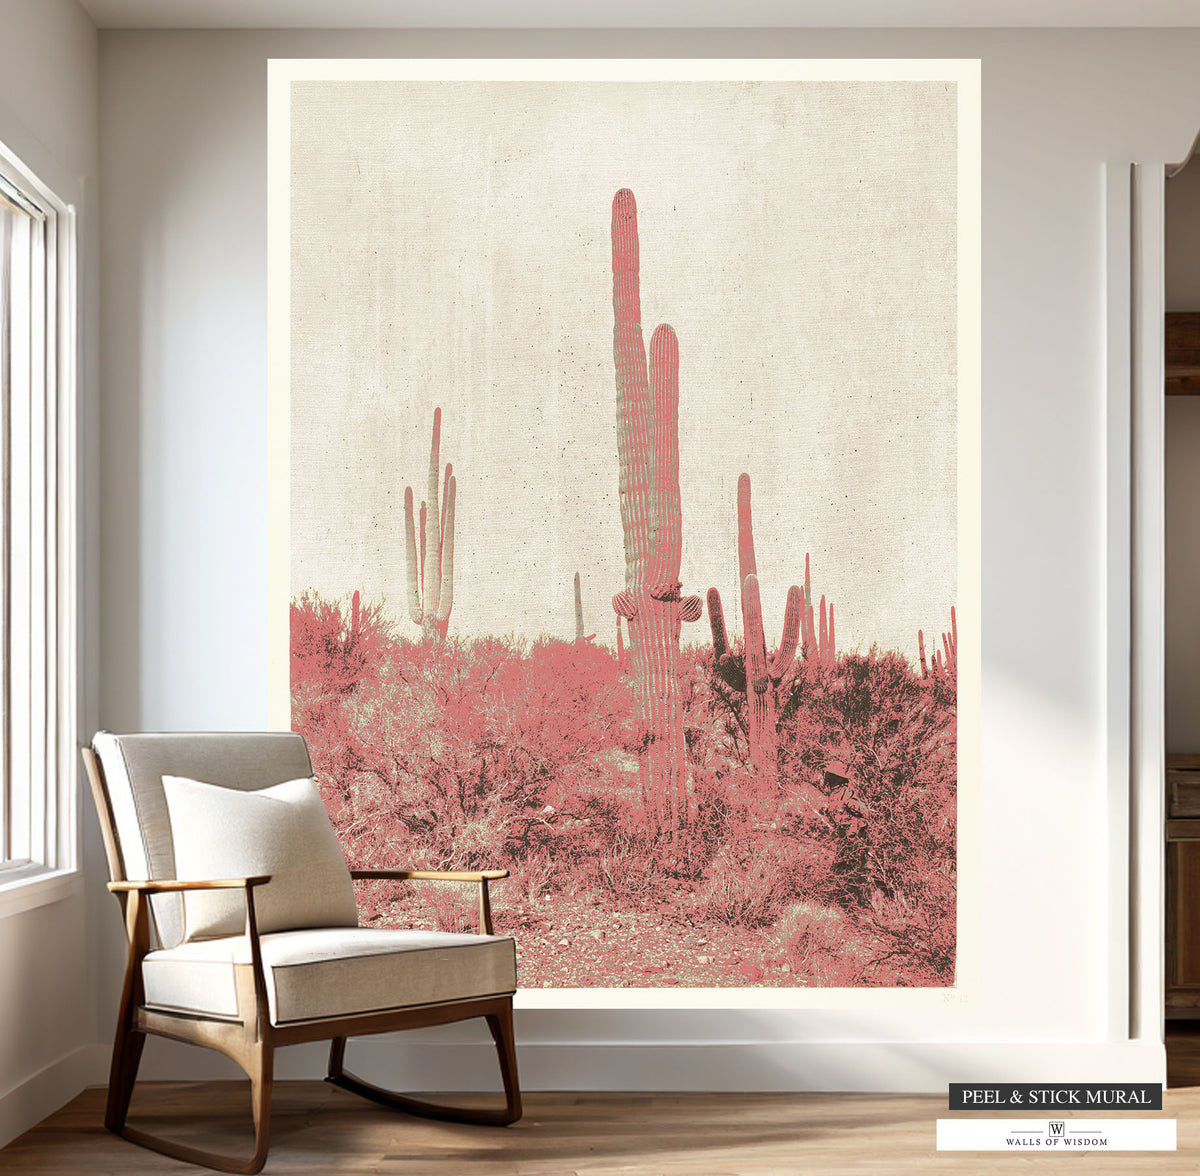 Western Boho Style Desert Cactus Mural in Black, White, and Pink.